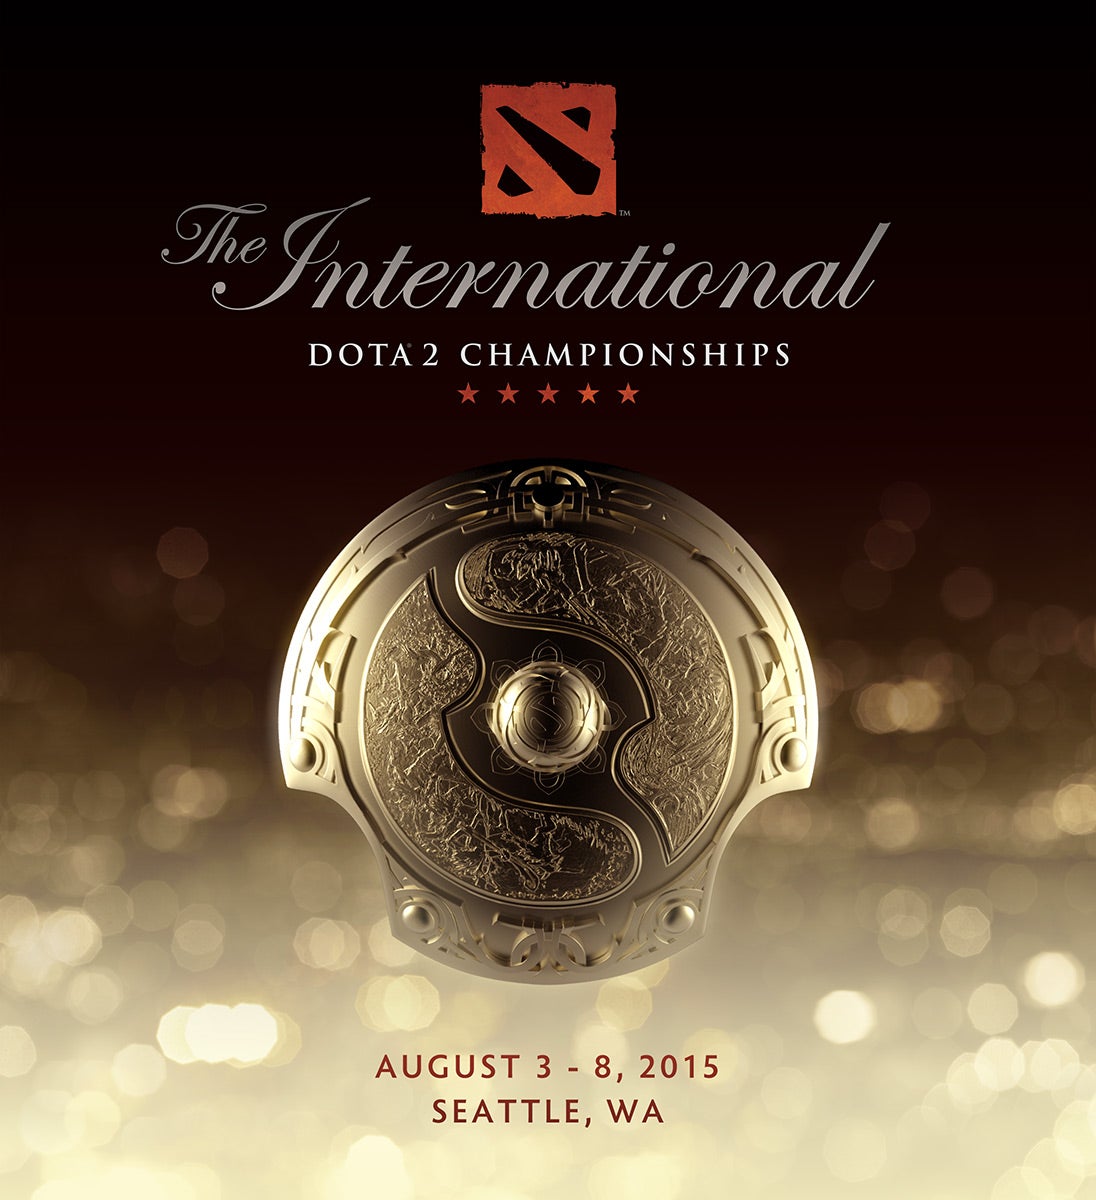 Image for The International 2015 Dota 2 tournament takes place in August 